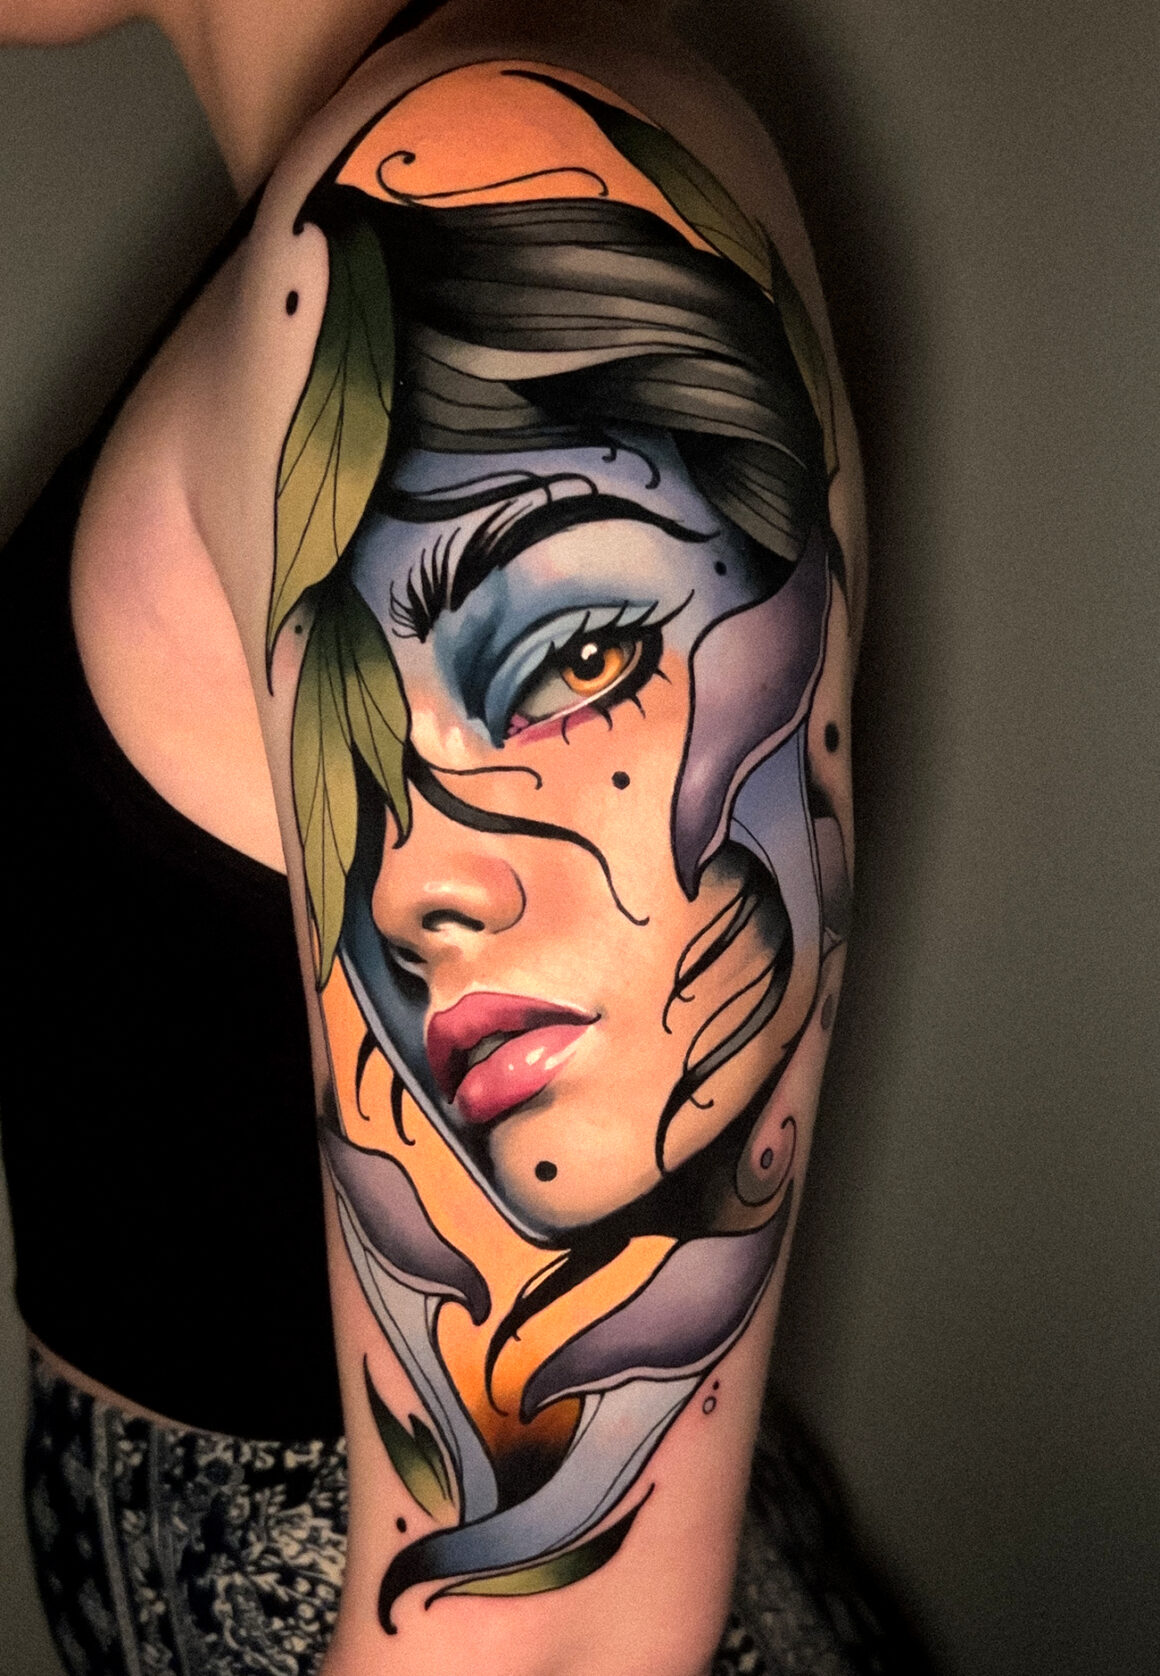 Tattoo by Andrey, @andreytattooing